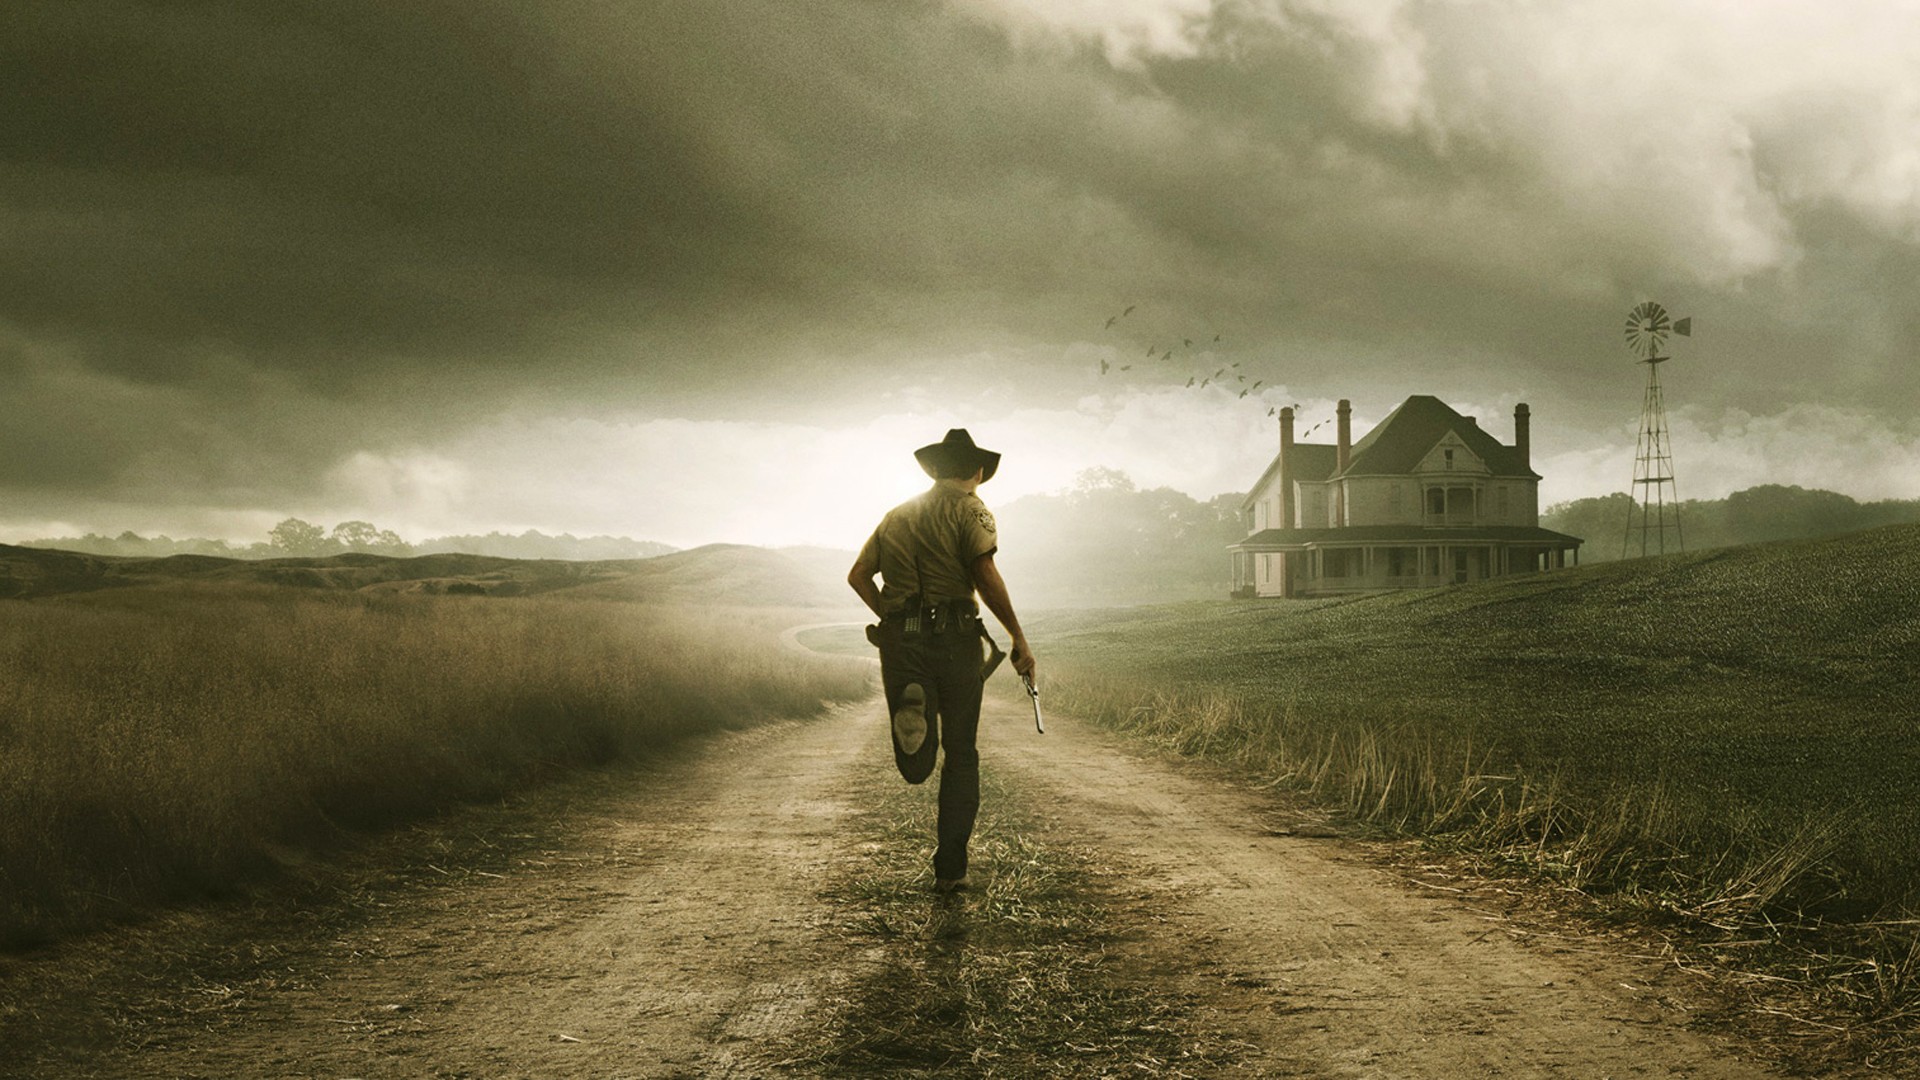 General 1920x1080 TV series Andrew Lincoln Farmhouse sky apocalyptic The Walking Dead horror